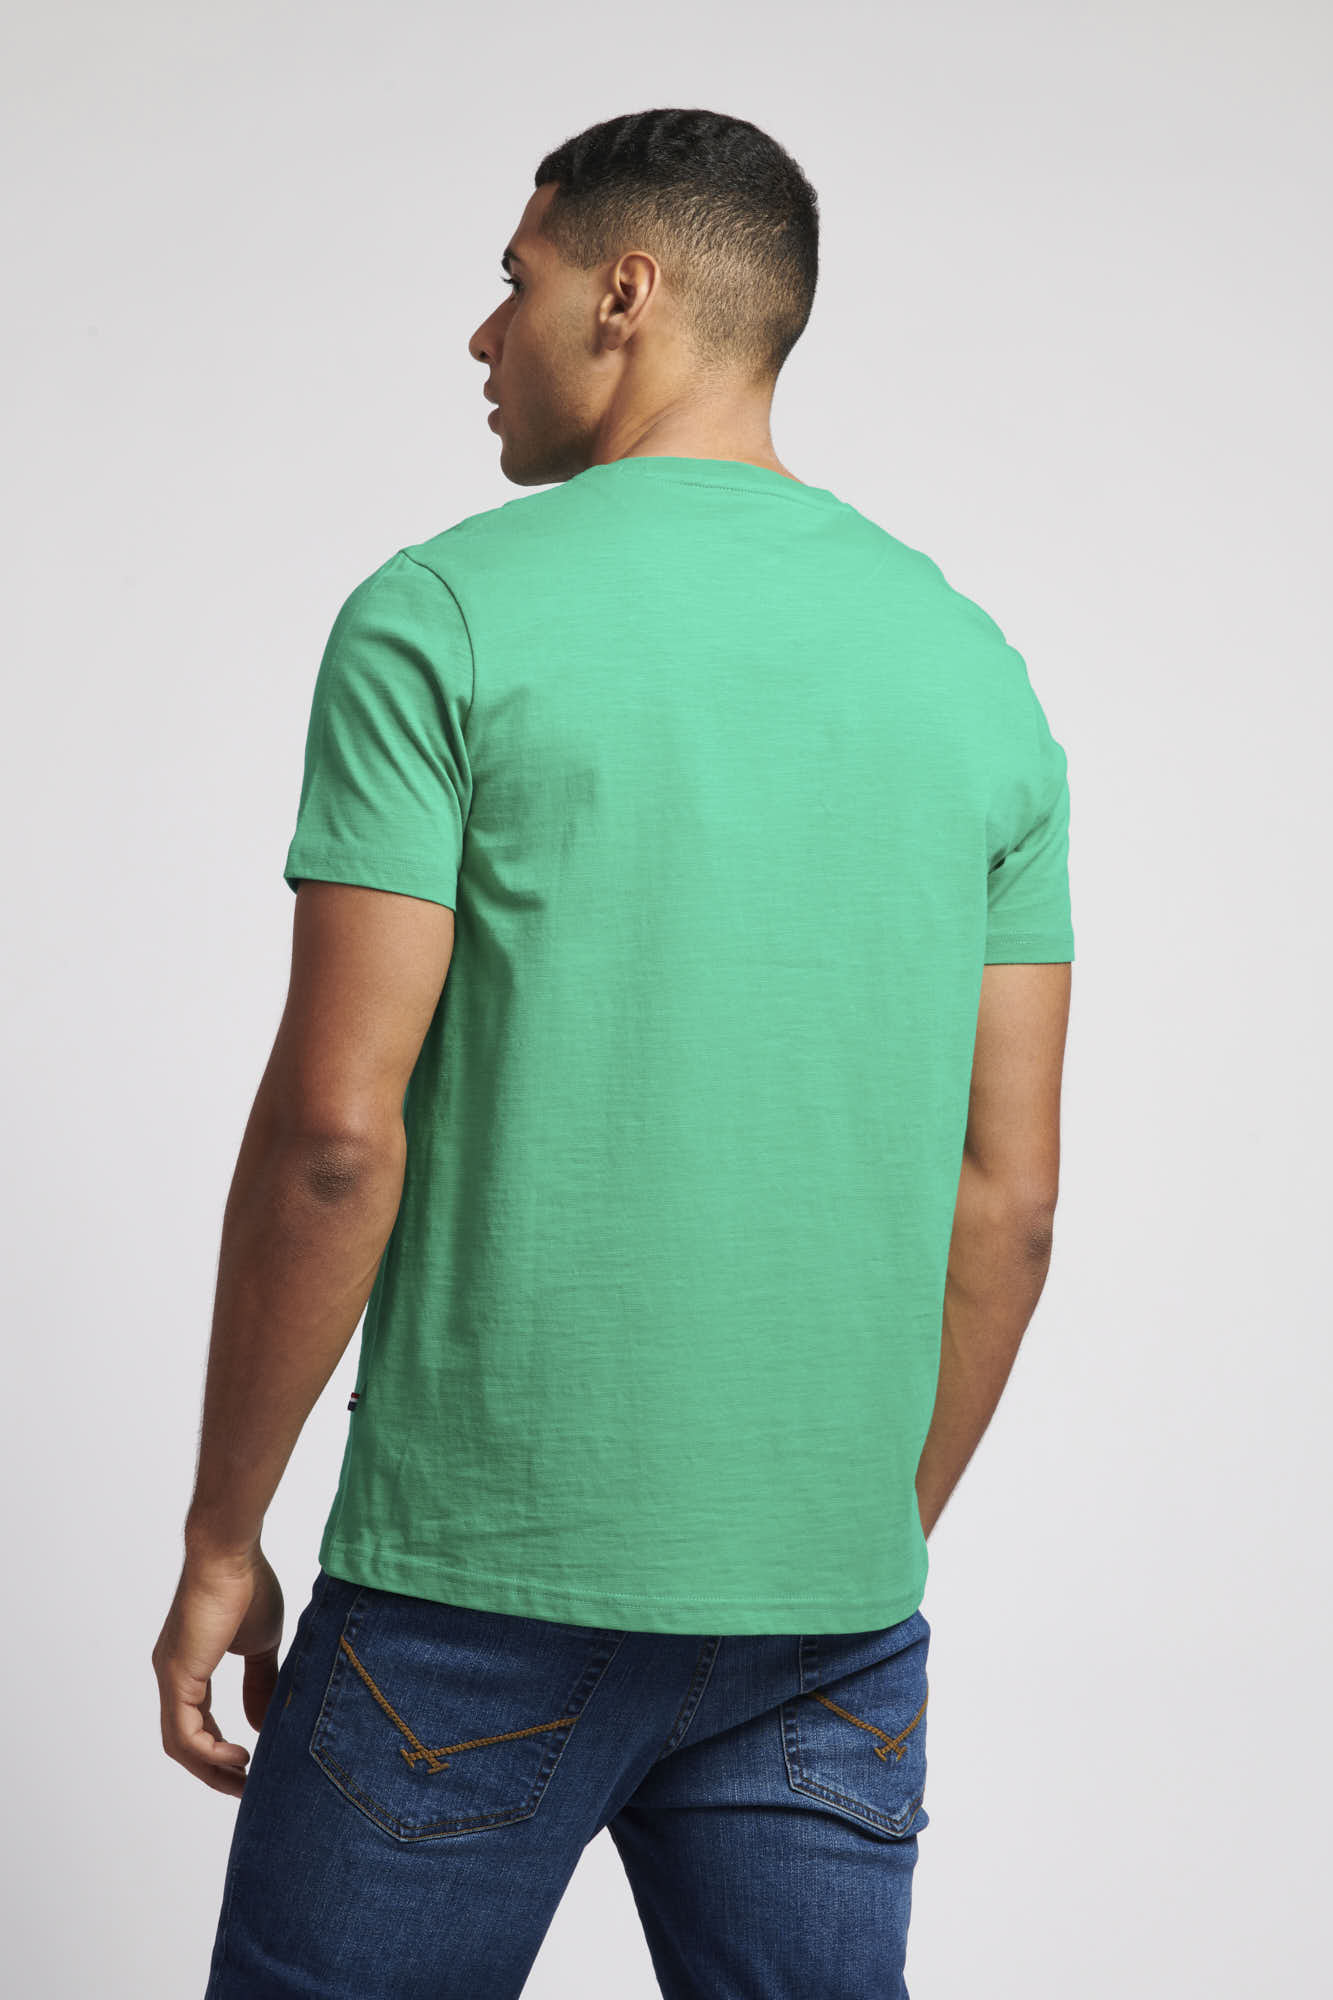 Mens USPA Since 1890 Graphic T-Shirt in Golf Green